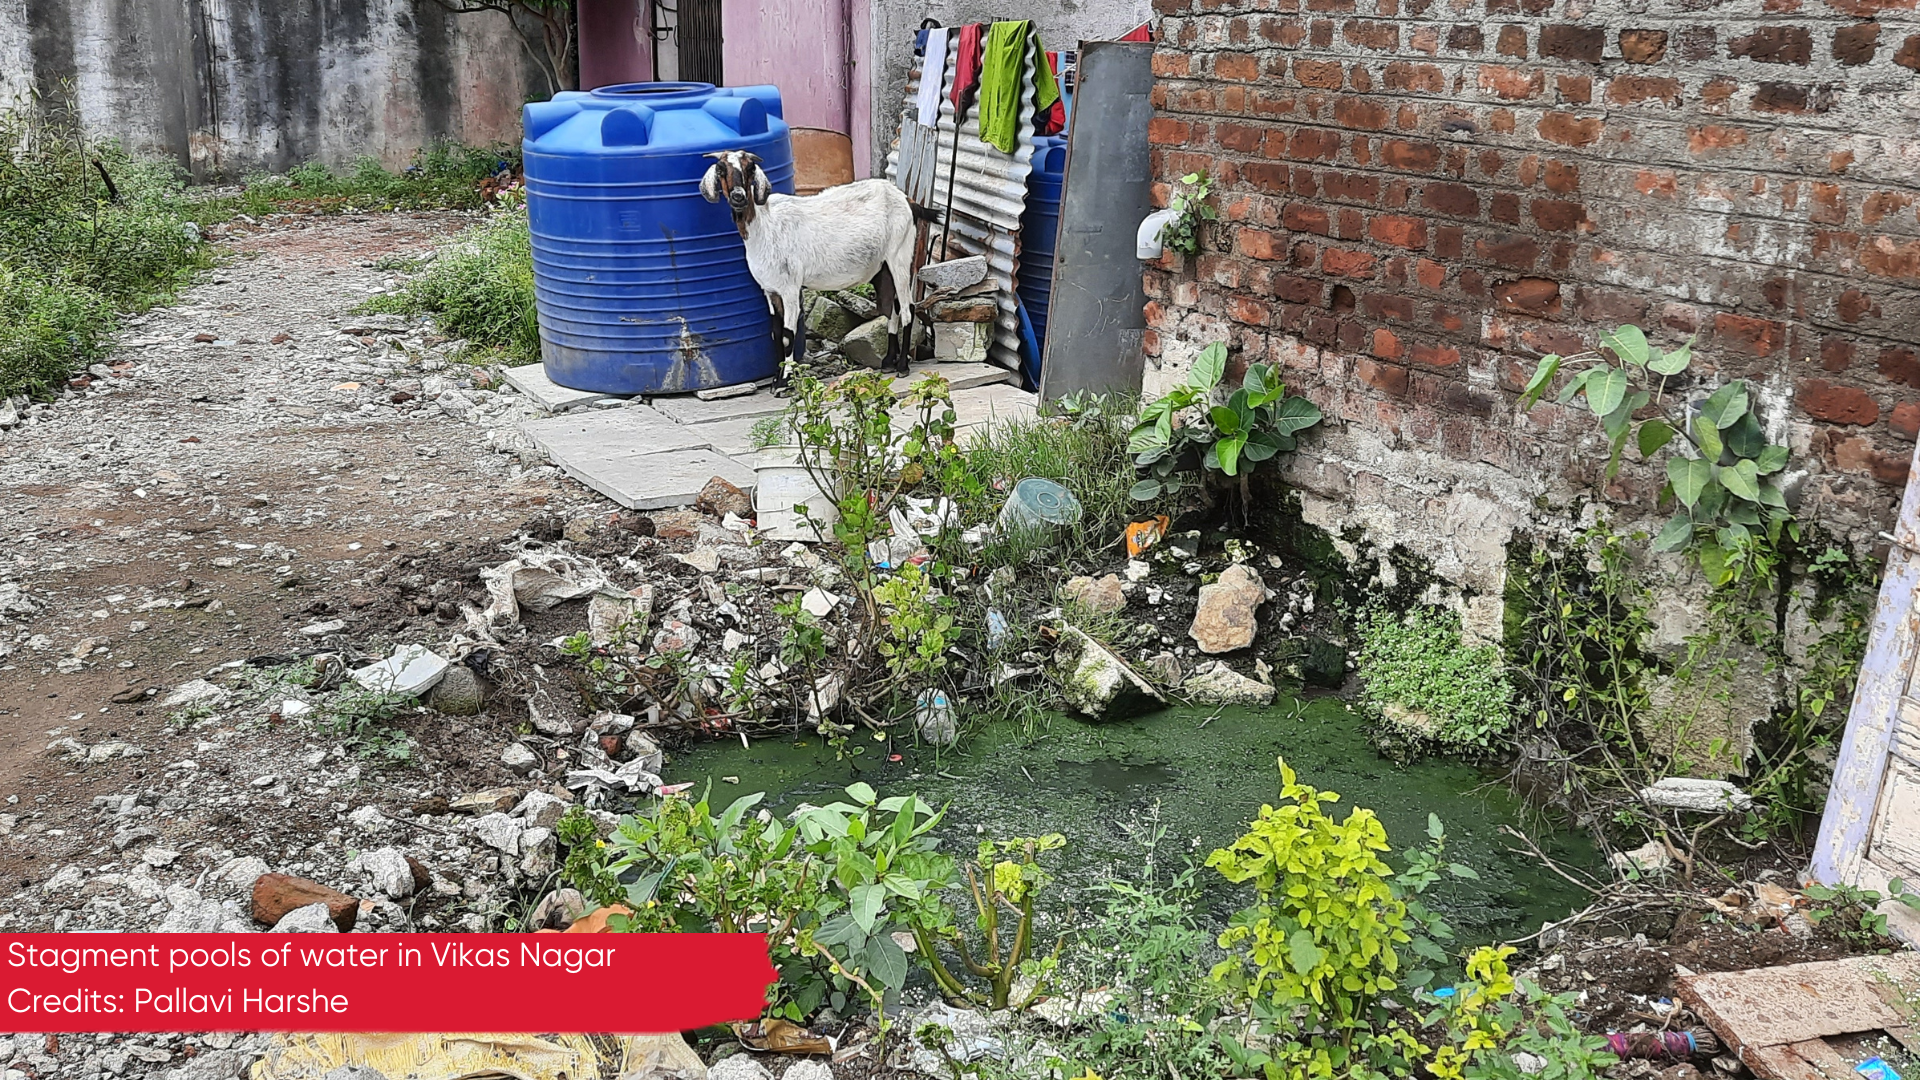 Stagnant pools of water in the Indian village of Vikas Nagar